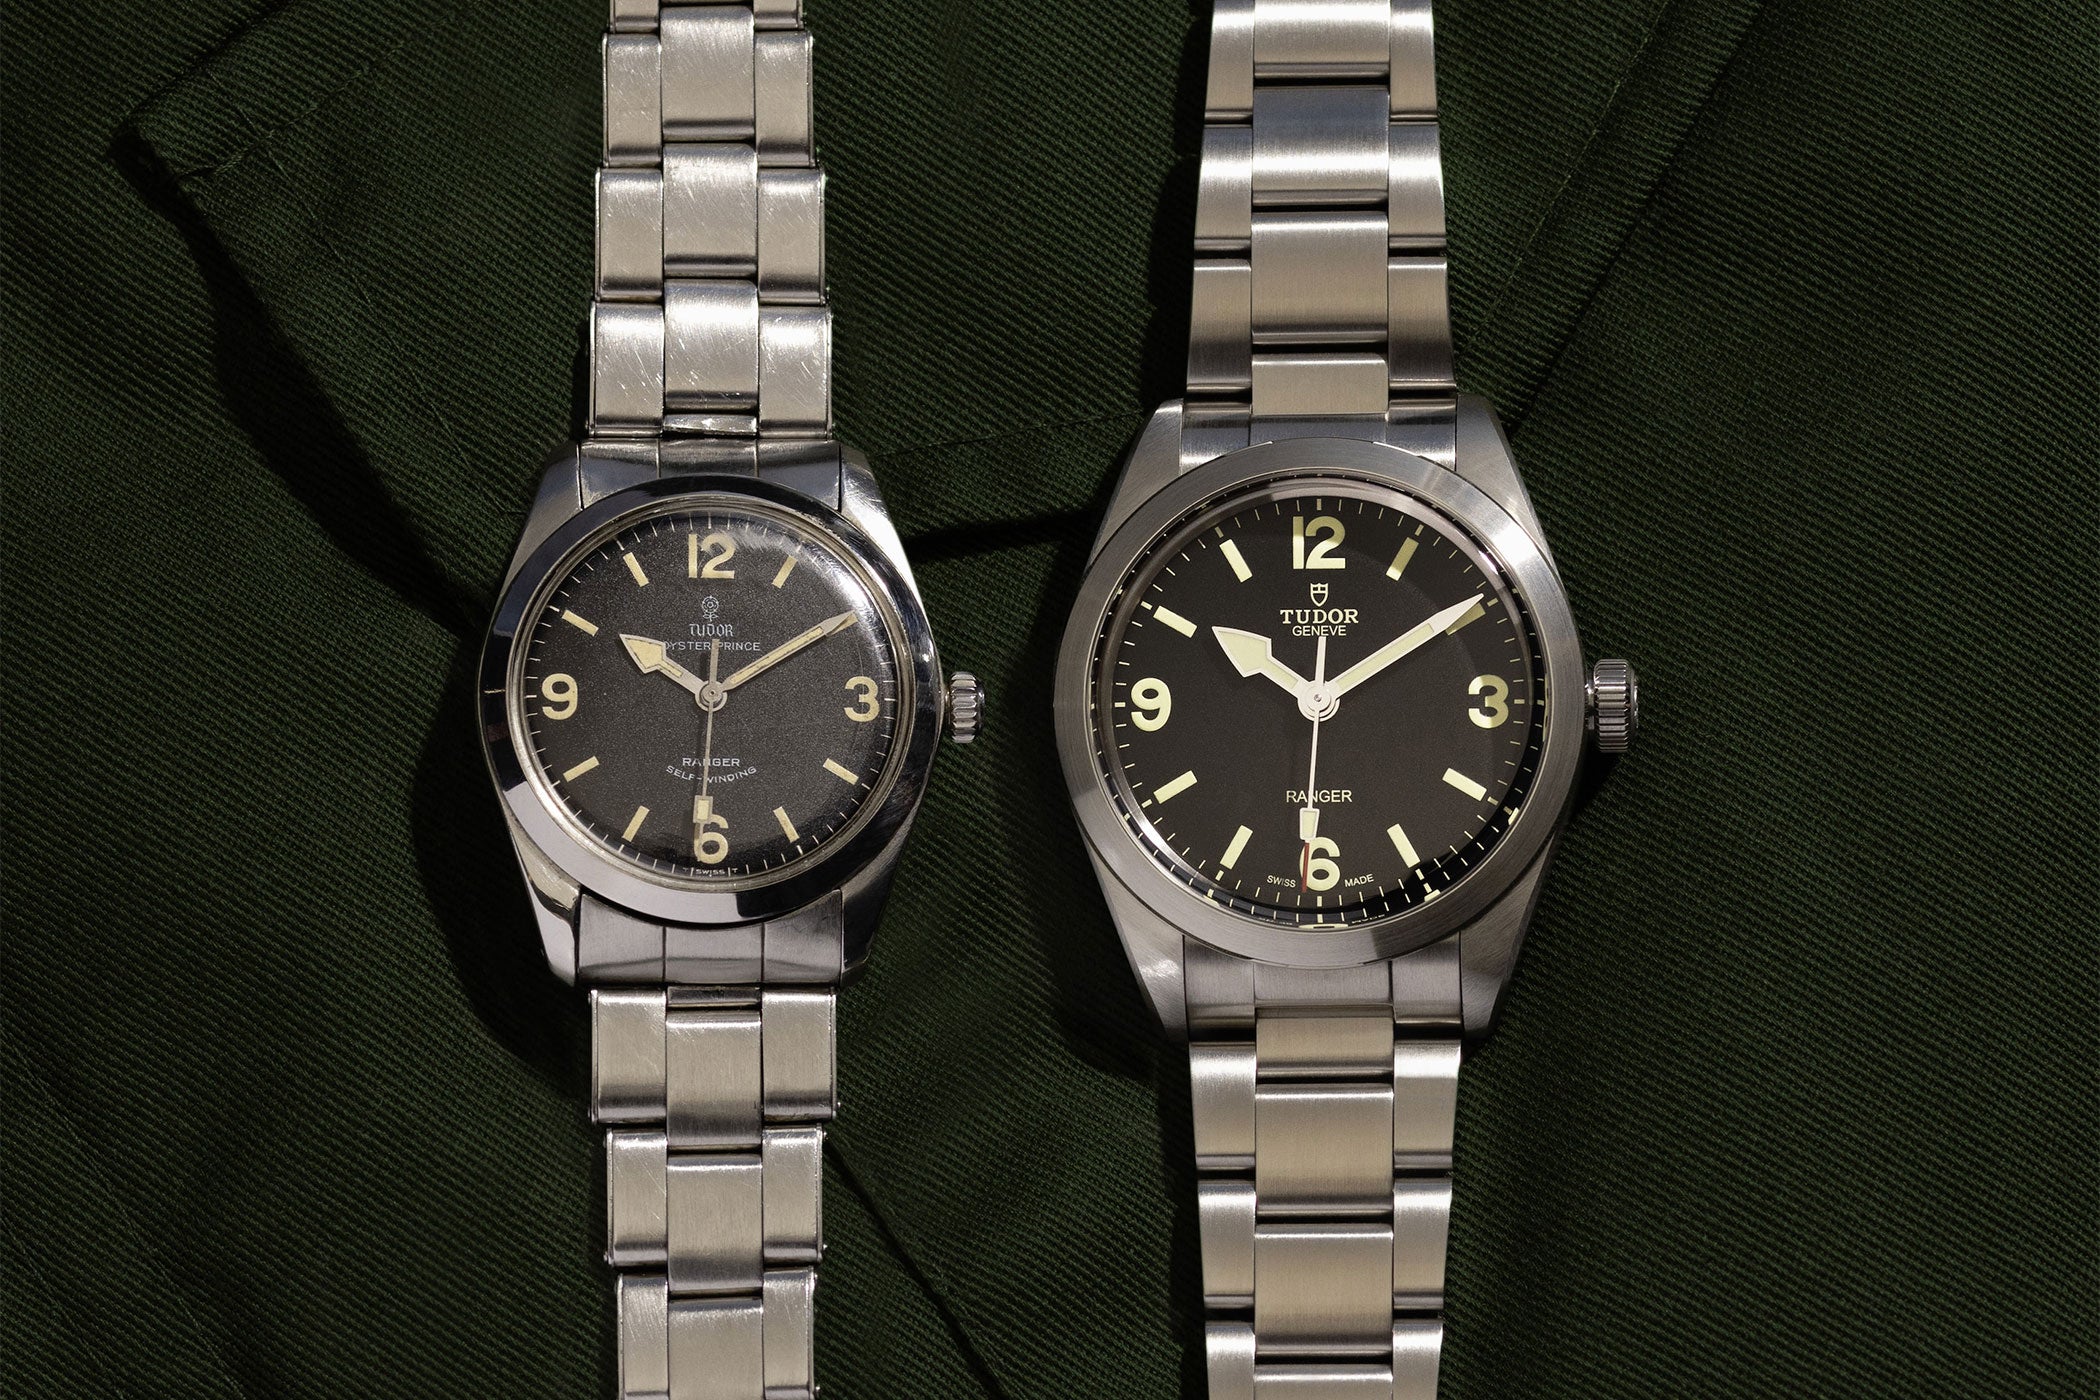 Tudor Ranger 7995 and 79950 side by side